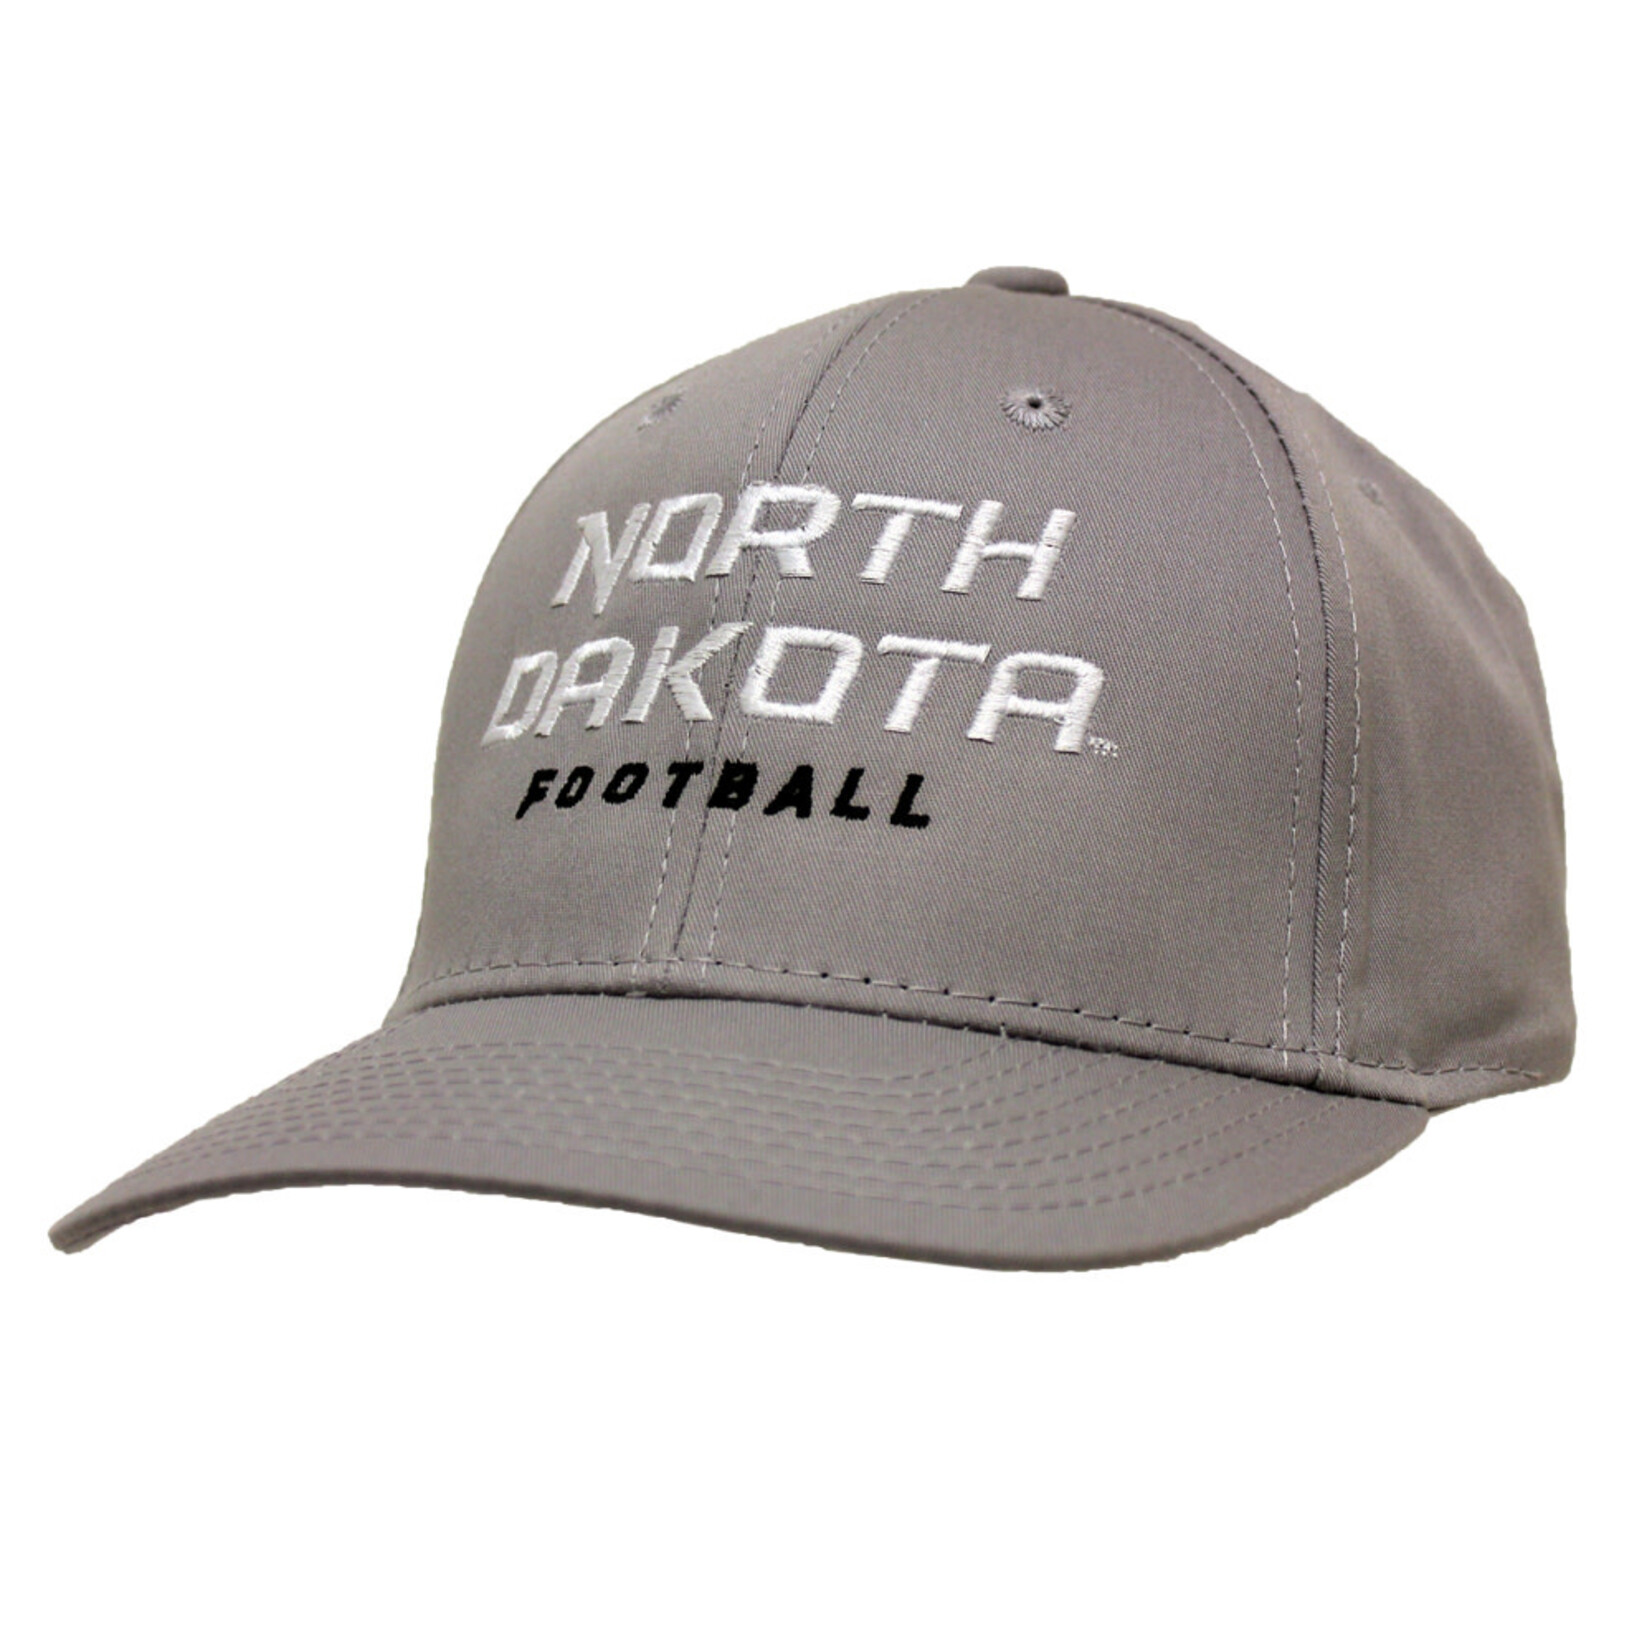 The Game The Game Football Twill Snapback - Gray